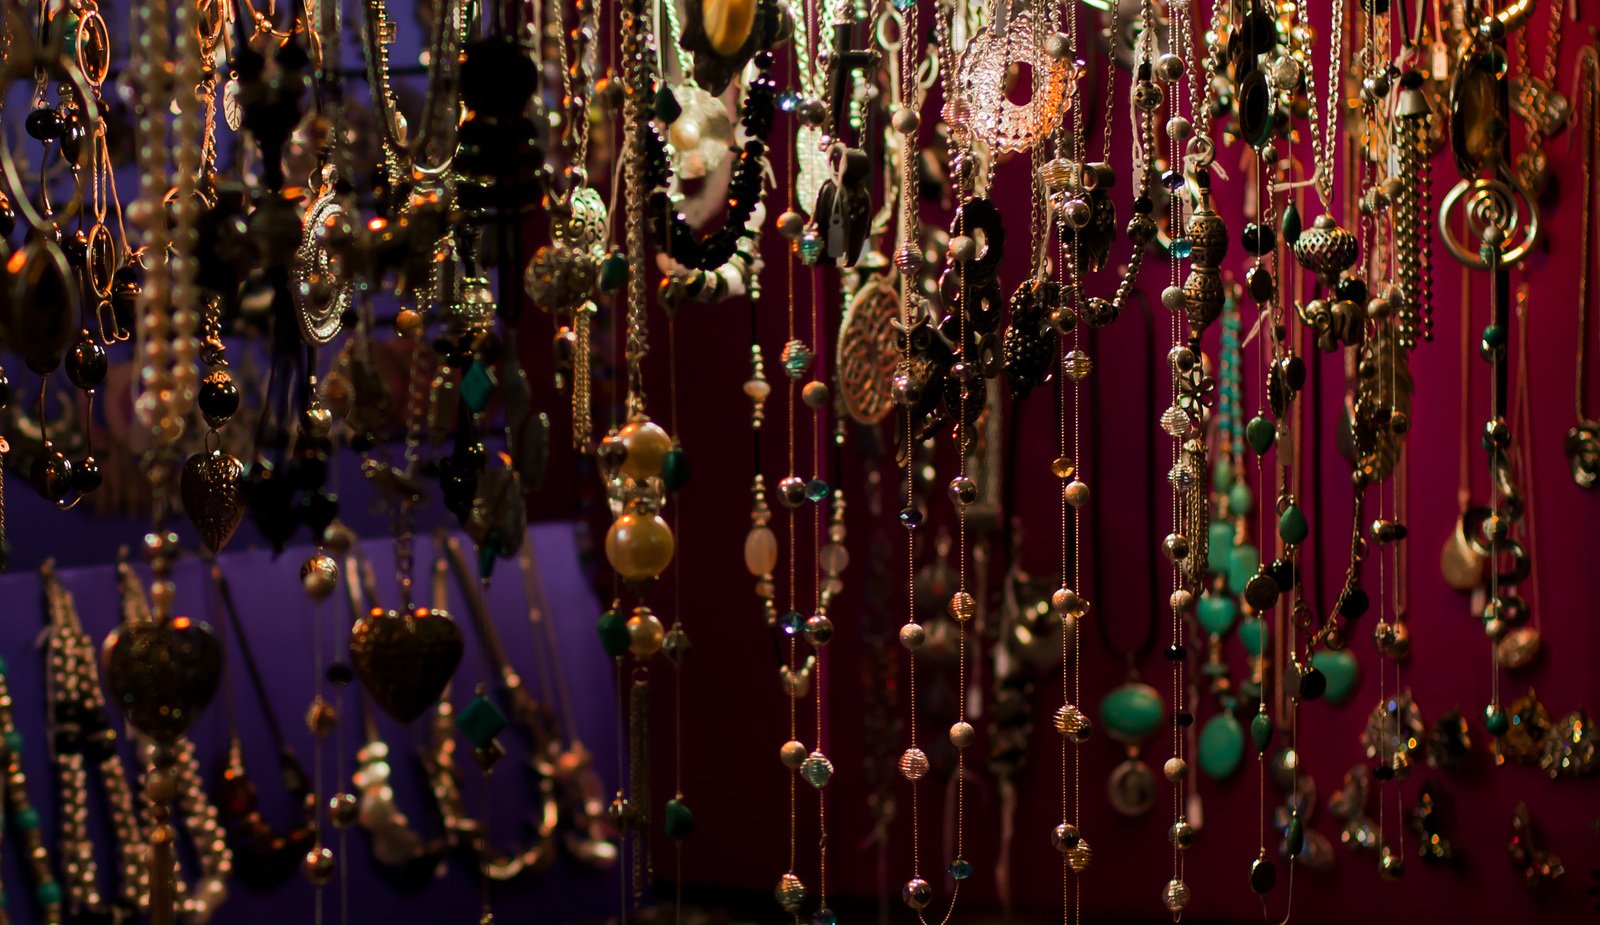 large amount of necklaces on display at the store